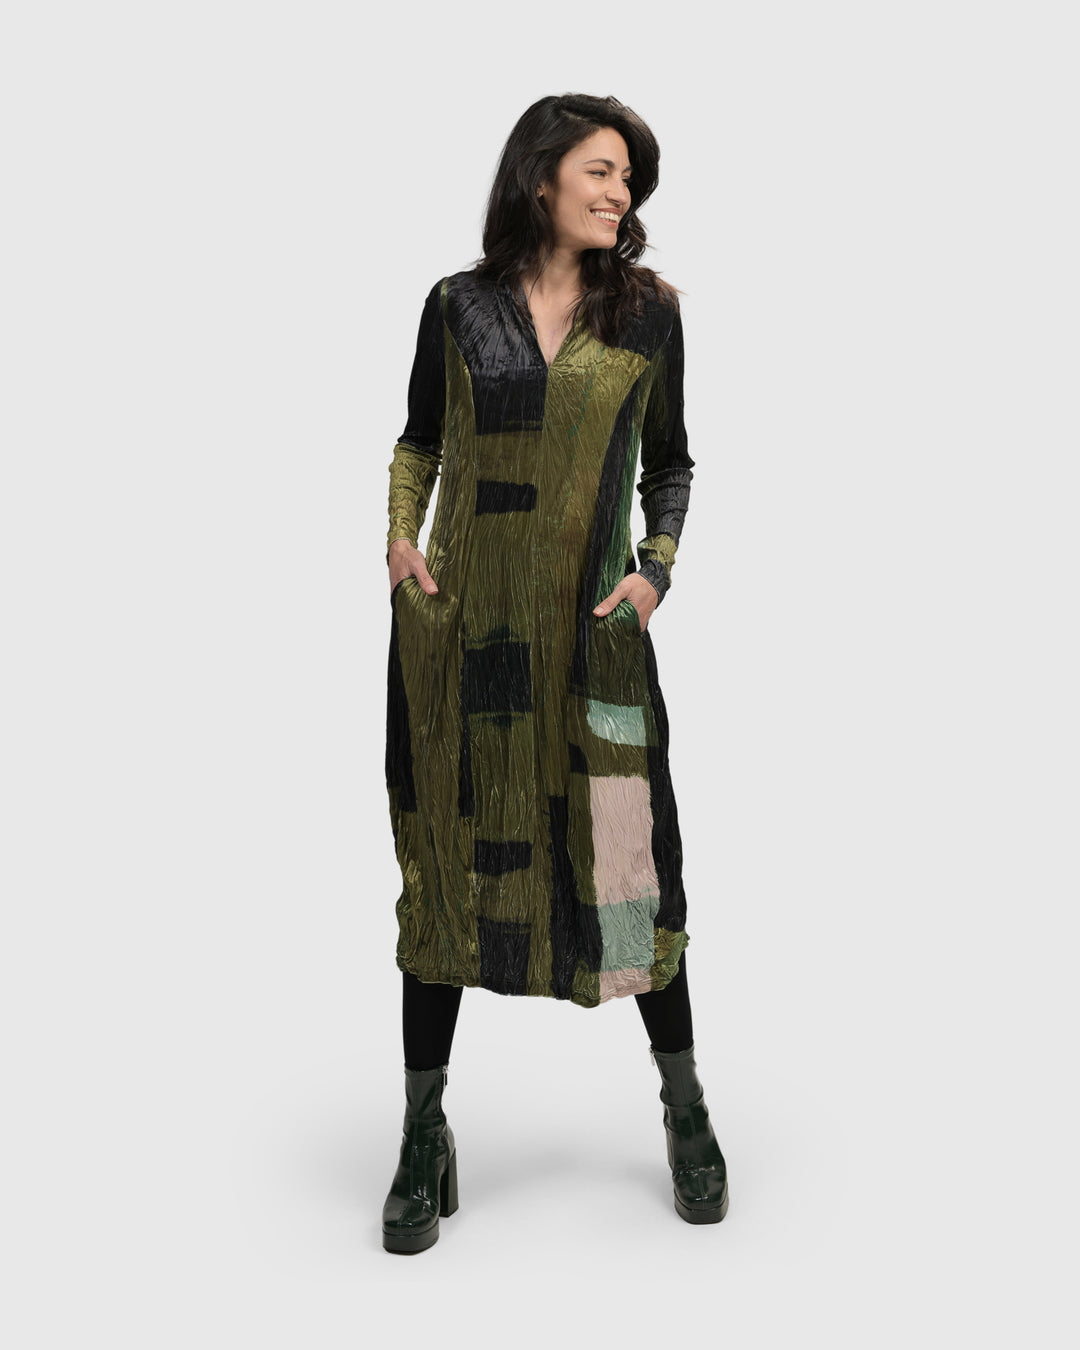 A woman wearing an Al Fresco Cocoon Dress, Olive by ALEMBIKA and black boots.